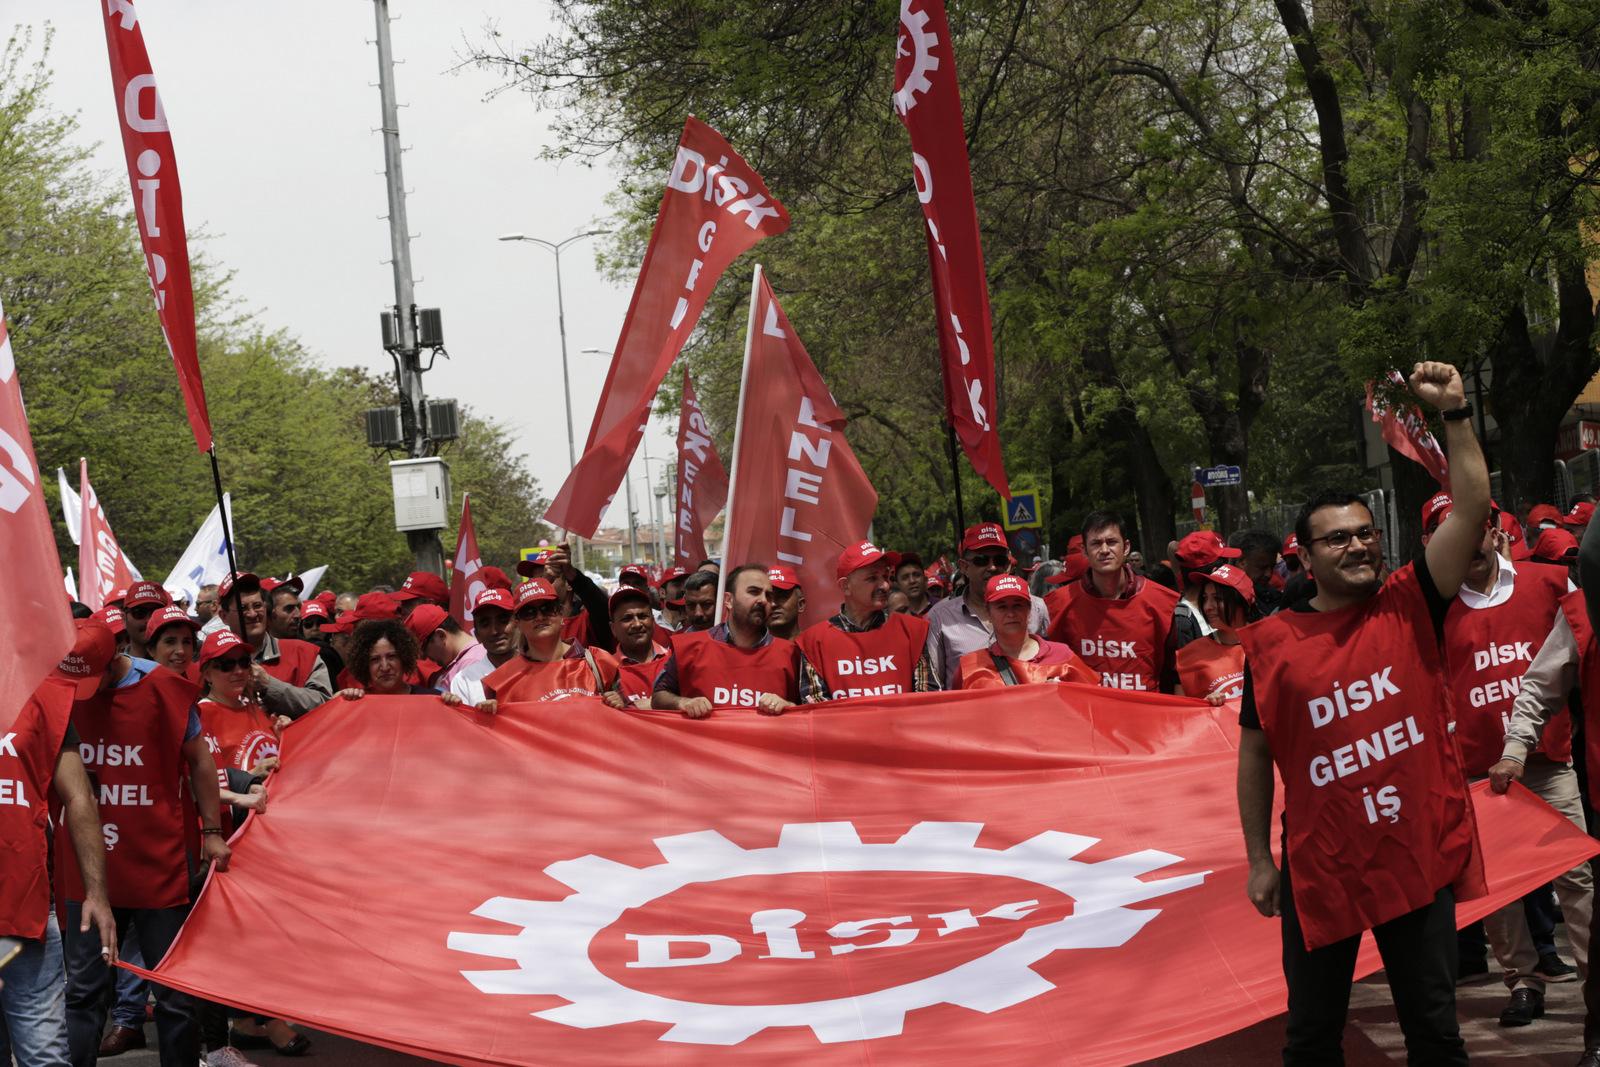 Protesters hold α banner and chant slogans during a May day protest in Ankara, Turkey , Monday, May 1, 2017. Workers and activists marked May Day with defiant rallies and marches for better pay and working conditions Monday.